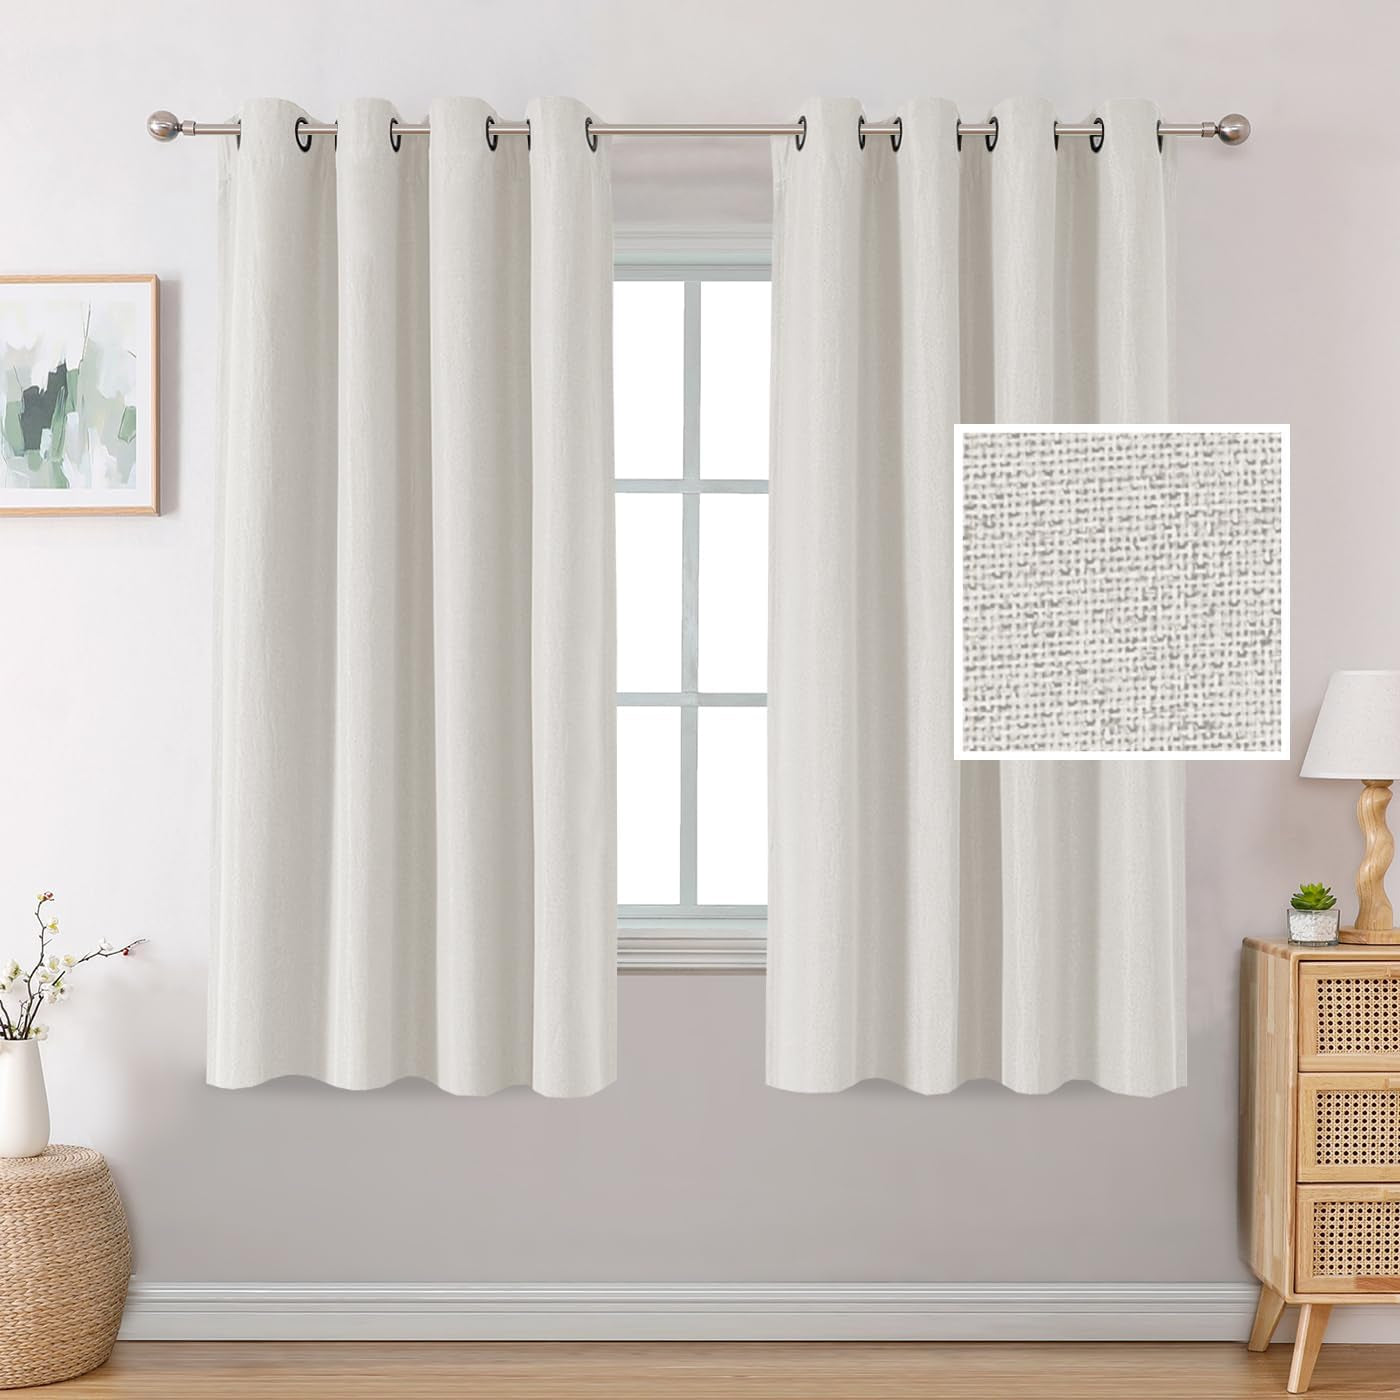 H.VERSAILTEX Linen Blackout Curtains 84 Inches Long Thermal Insulated Room Darkening Linen Curtains for Bedroom Textured Burlap Grommet Window Curtains for Living Room, Bluestone and Taupe, 2 Panels  H.VERSAILTEX Natural 52"W X 63"L 